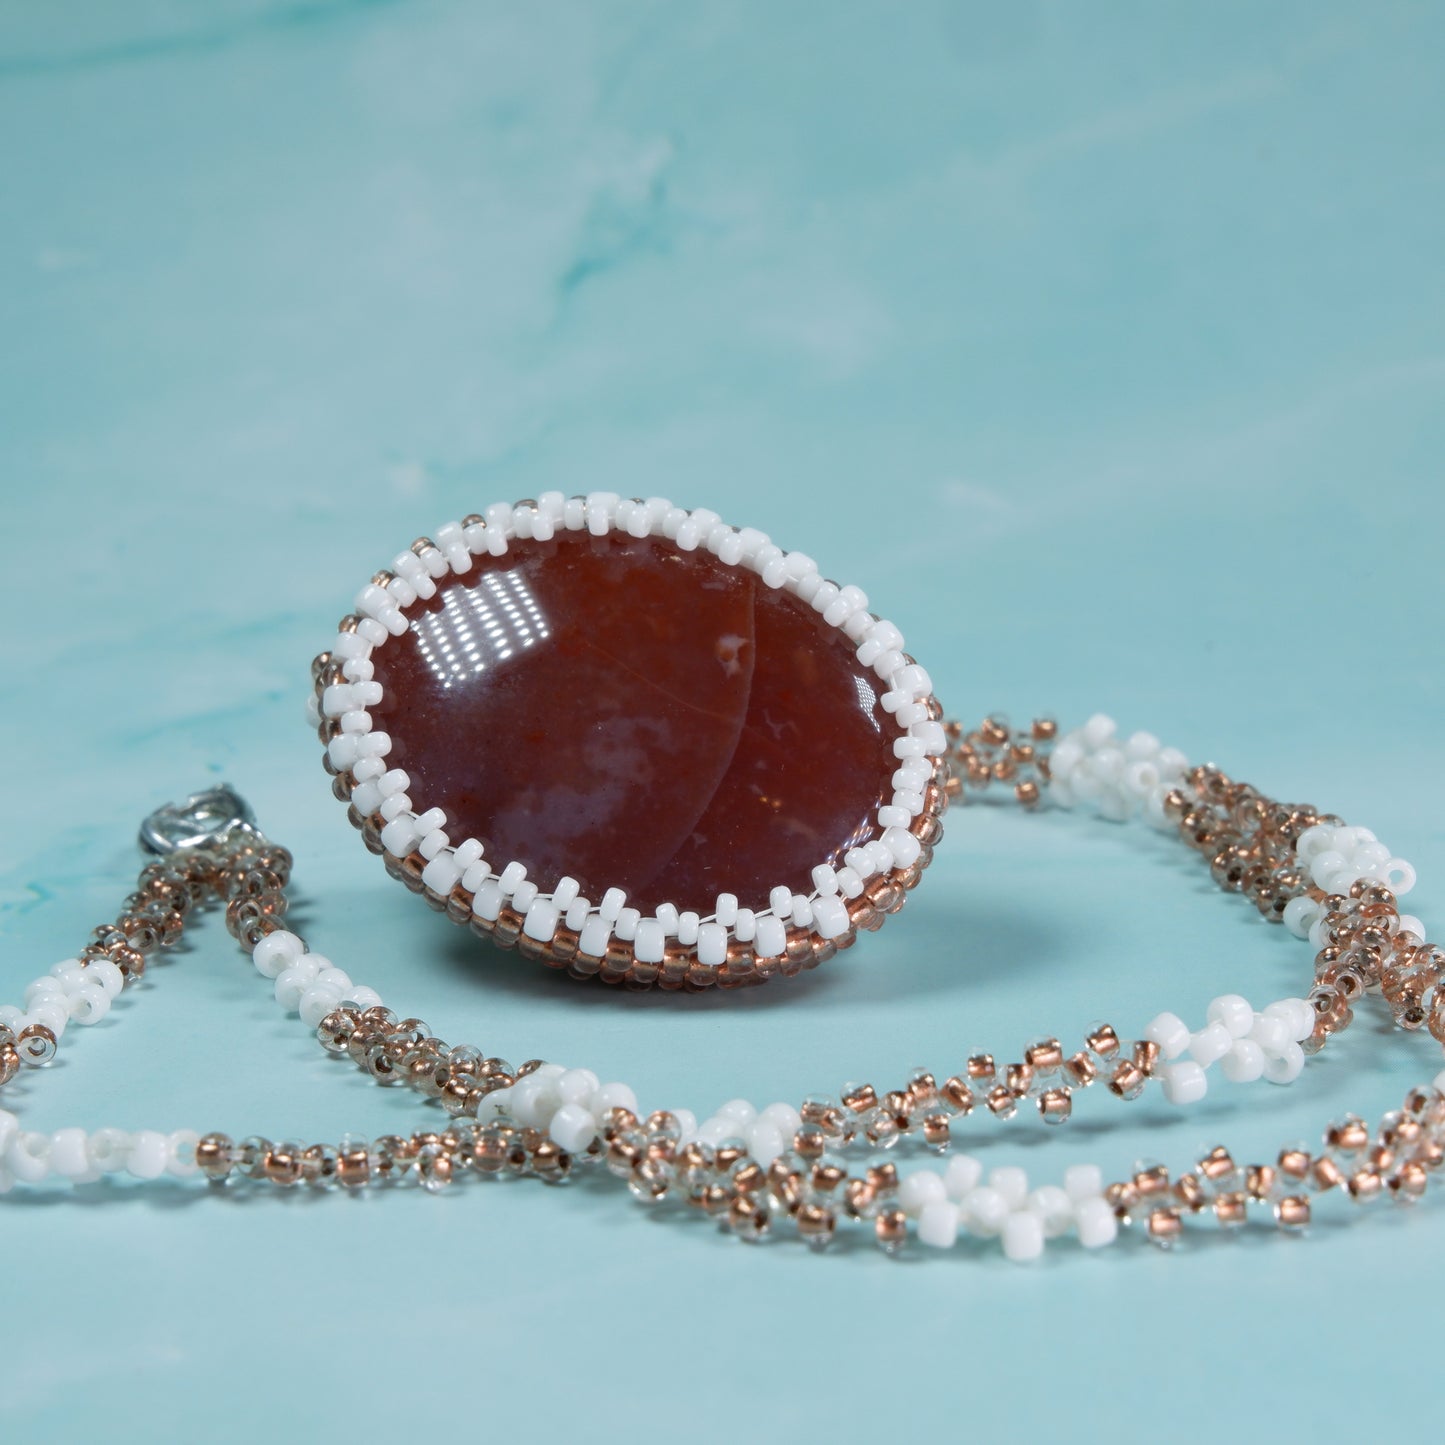 One-of-a-Kind Natural Orange Agate, White, and Copper Beaded Necklace